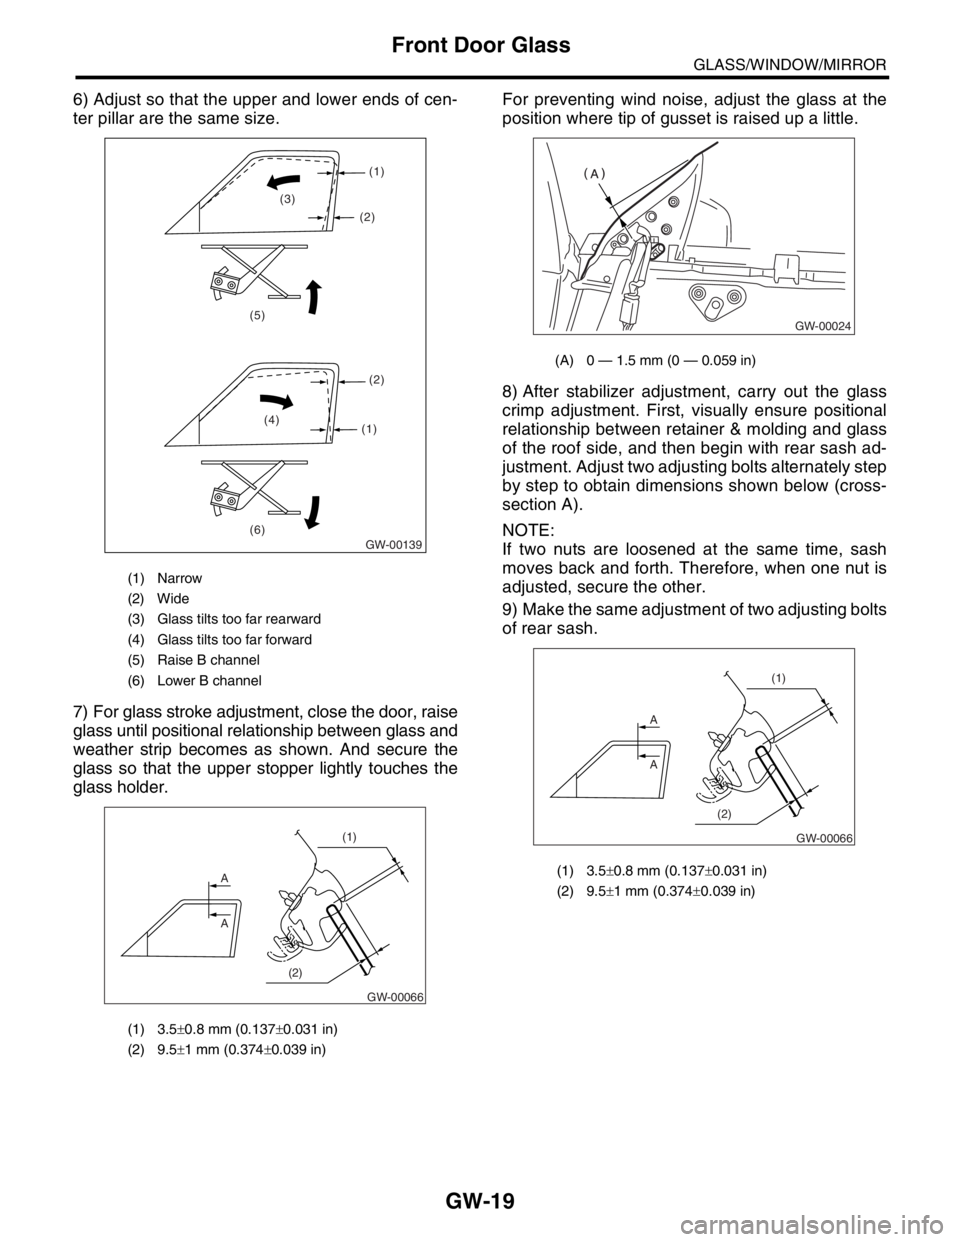 SUBARU FORESTER 2004  Service Repair Manual GW-19
GLASS/WINDOW/MIRROR
Front Door Glass
6) Adjust so that the upper and lower ends of cen-
ter pillar are the same size.
7) For glass stroke adjustment, close the door, raise
glass until positional